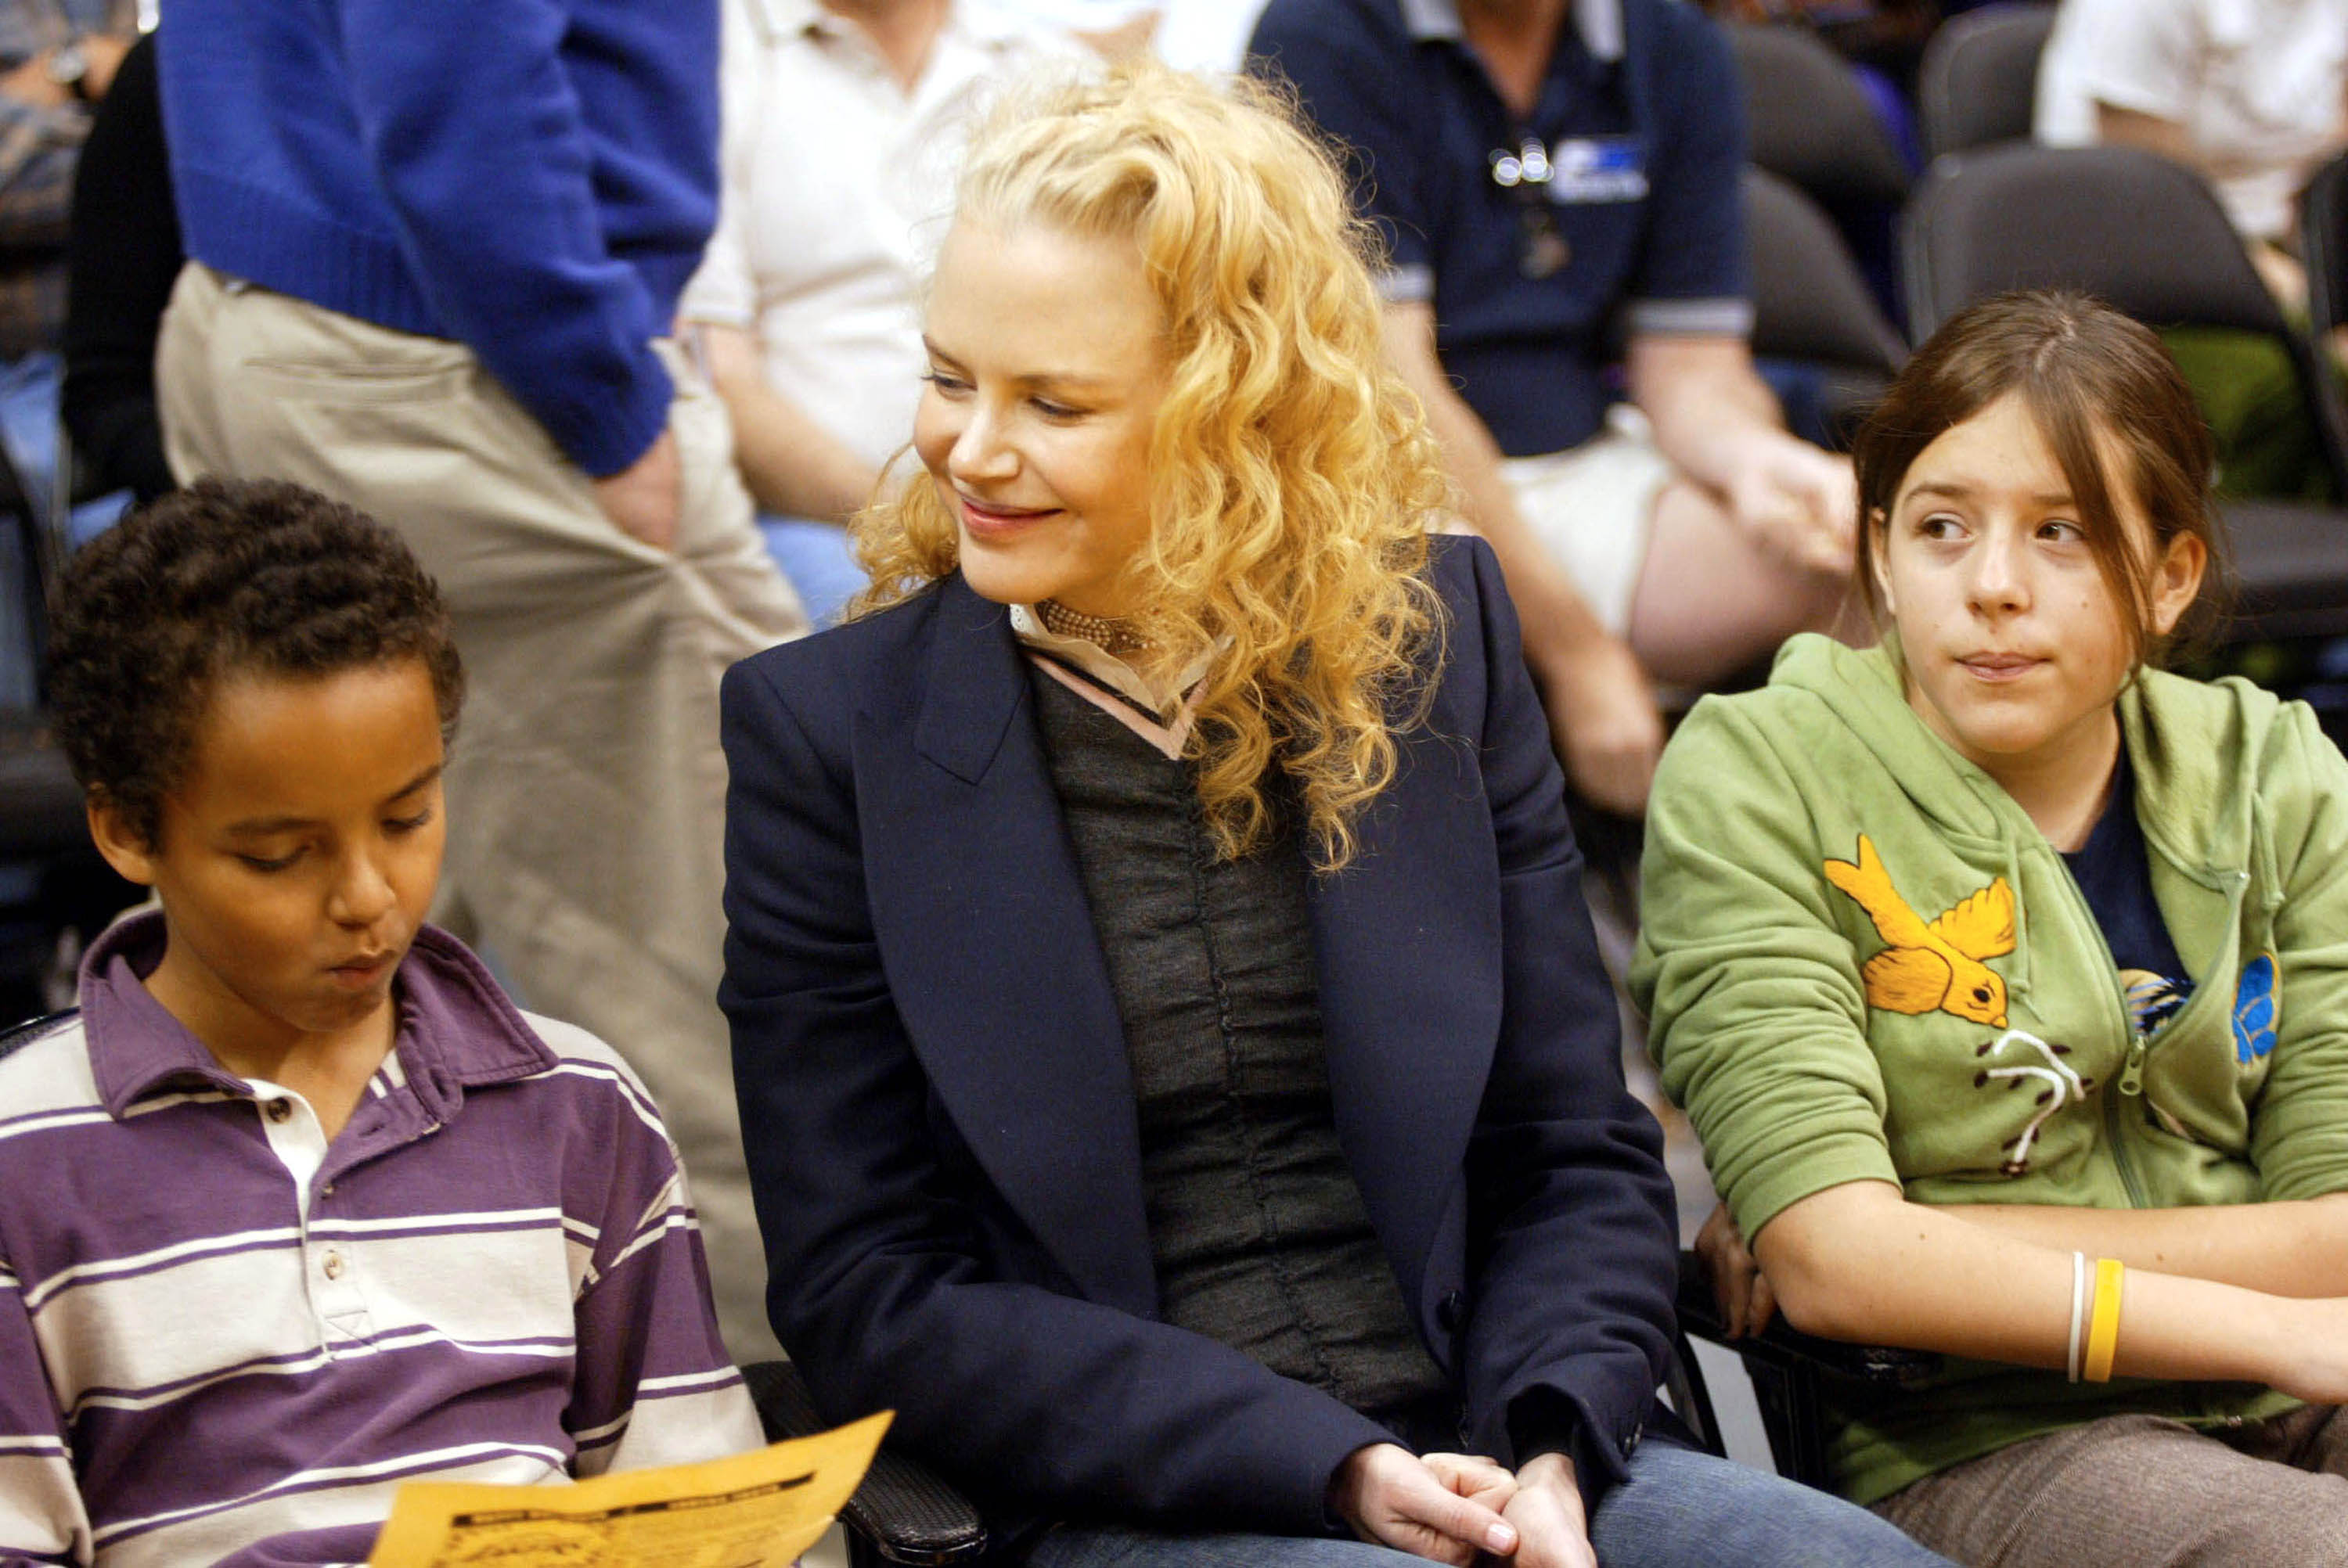 Connor Cruise, Nicole Kidman and, Isabella Jane Cruise attend a game between the Los Angeles Lakers and the Miami Heat in Los Angeles, California on December 25, 2004. | Source: Getty Images